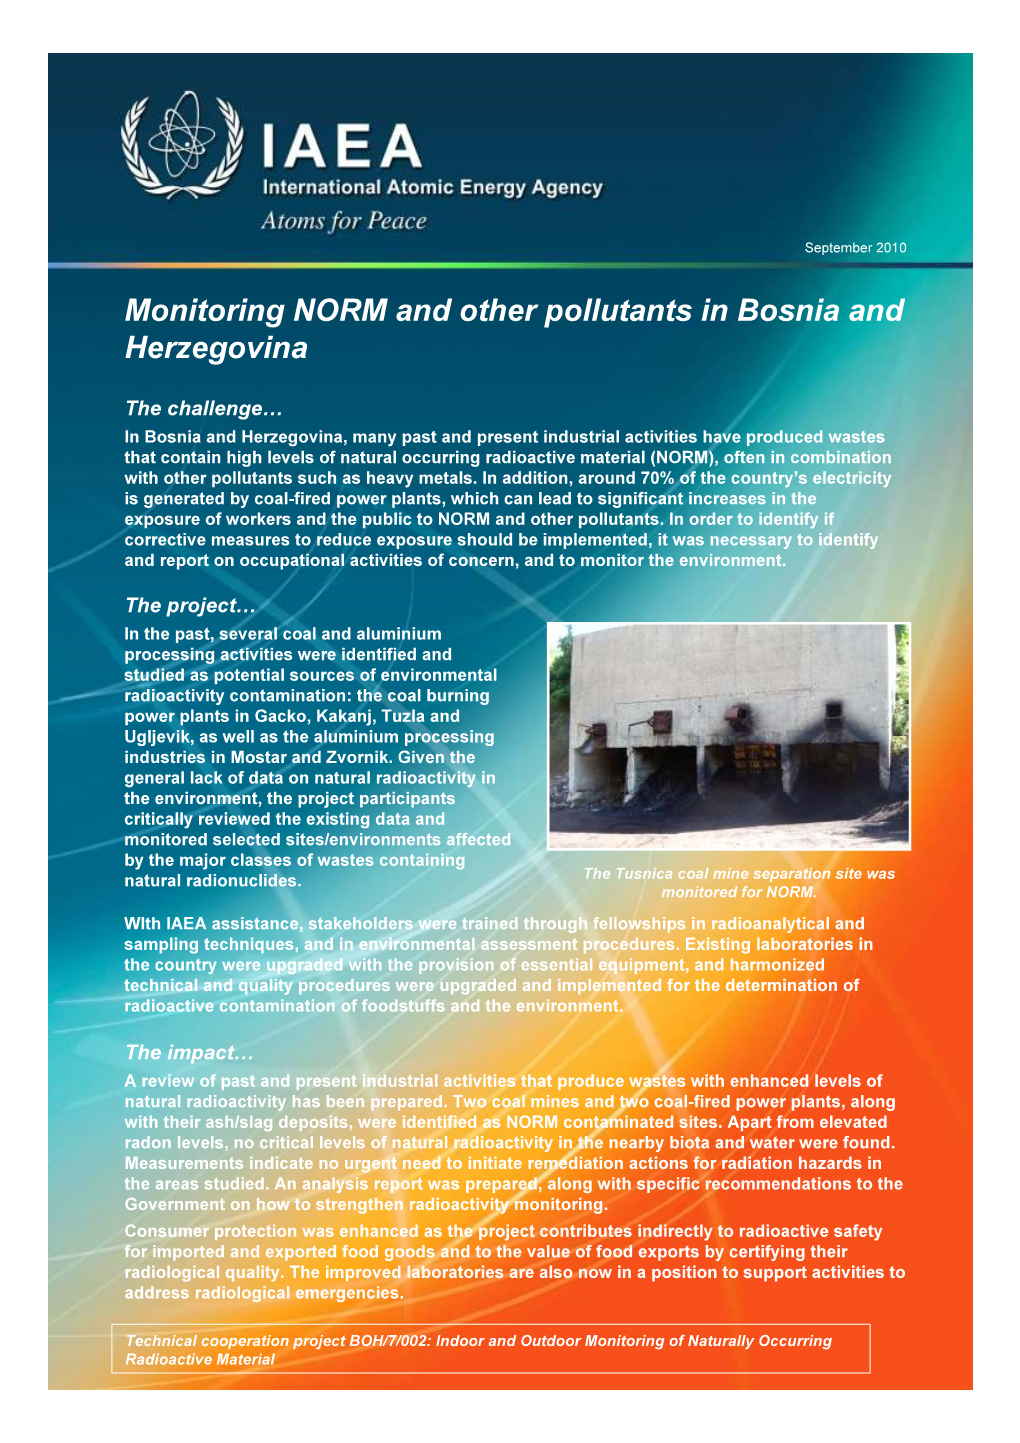 Monitoring NORM and Other Pollutants in Bosnia and Herzegovina